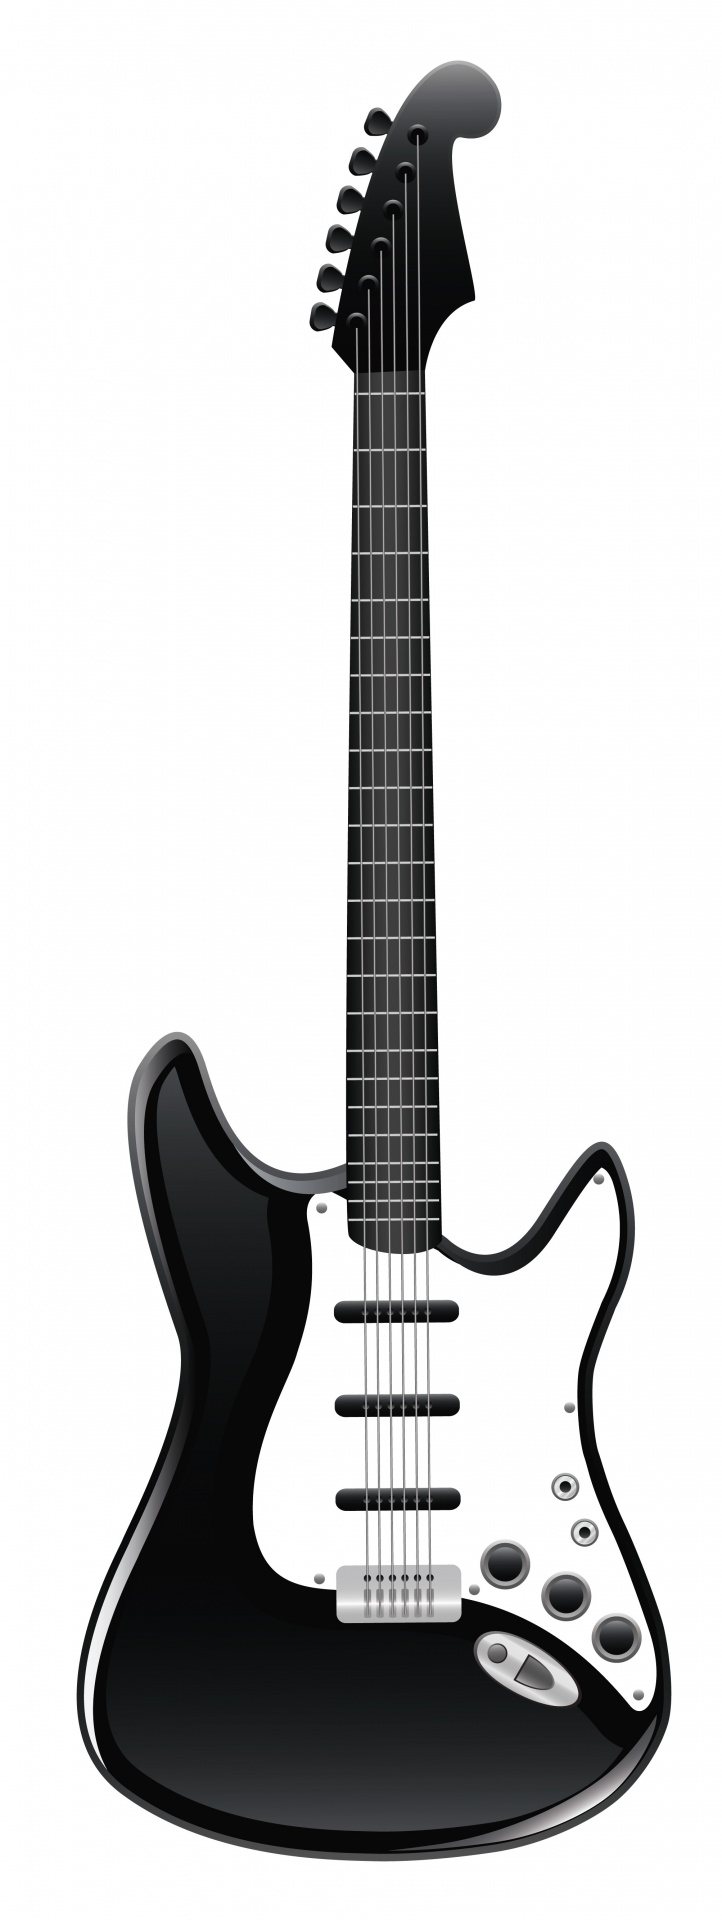 electric guitar illustration isolated free photo